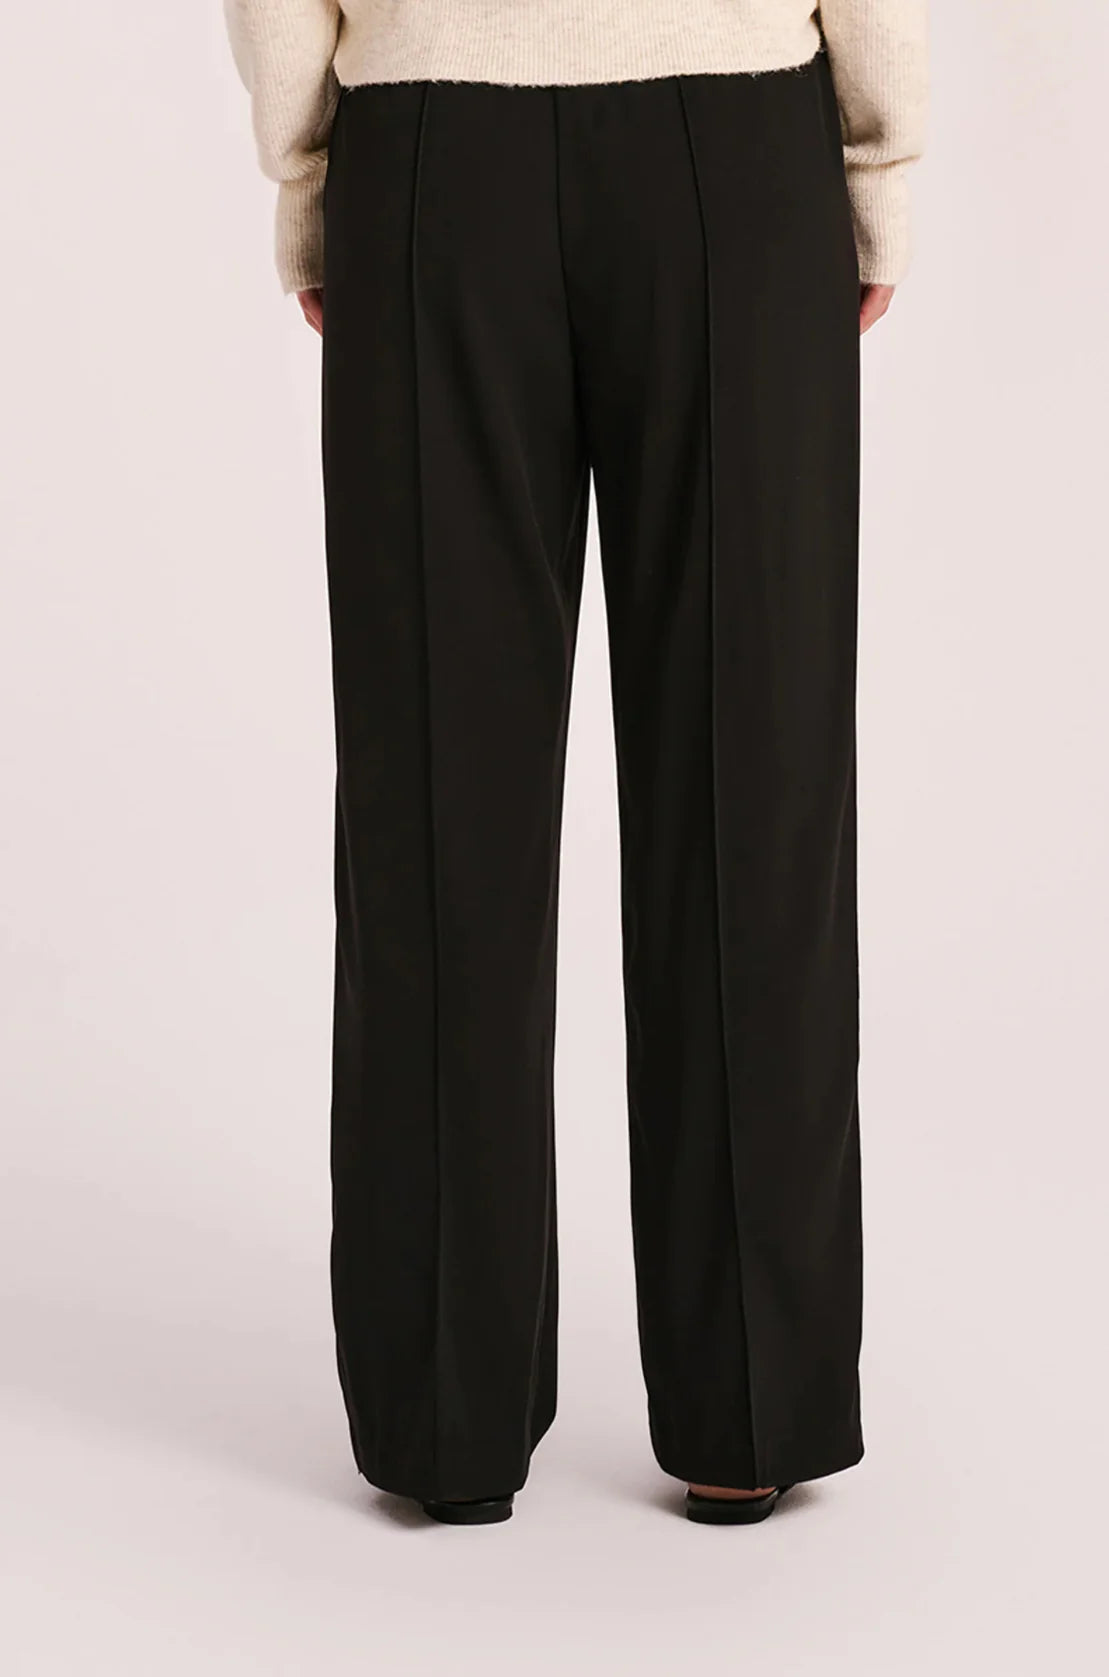 Nude Lucy - QUINCY PANT Black